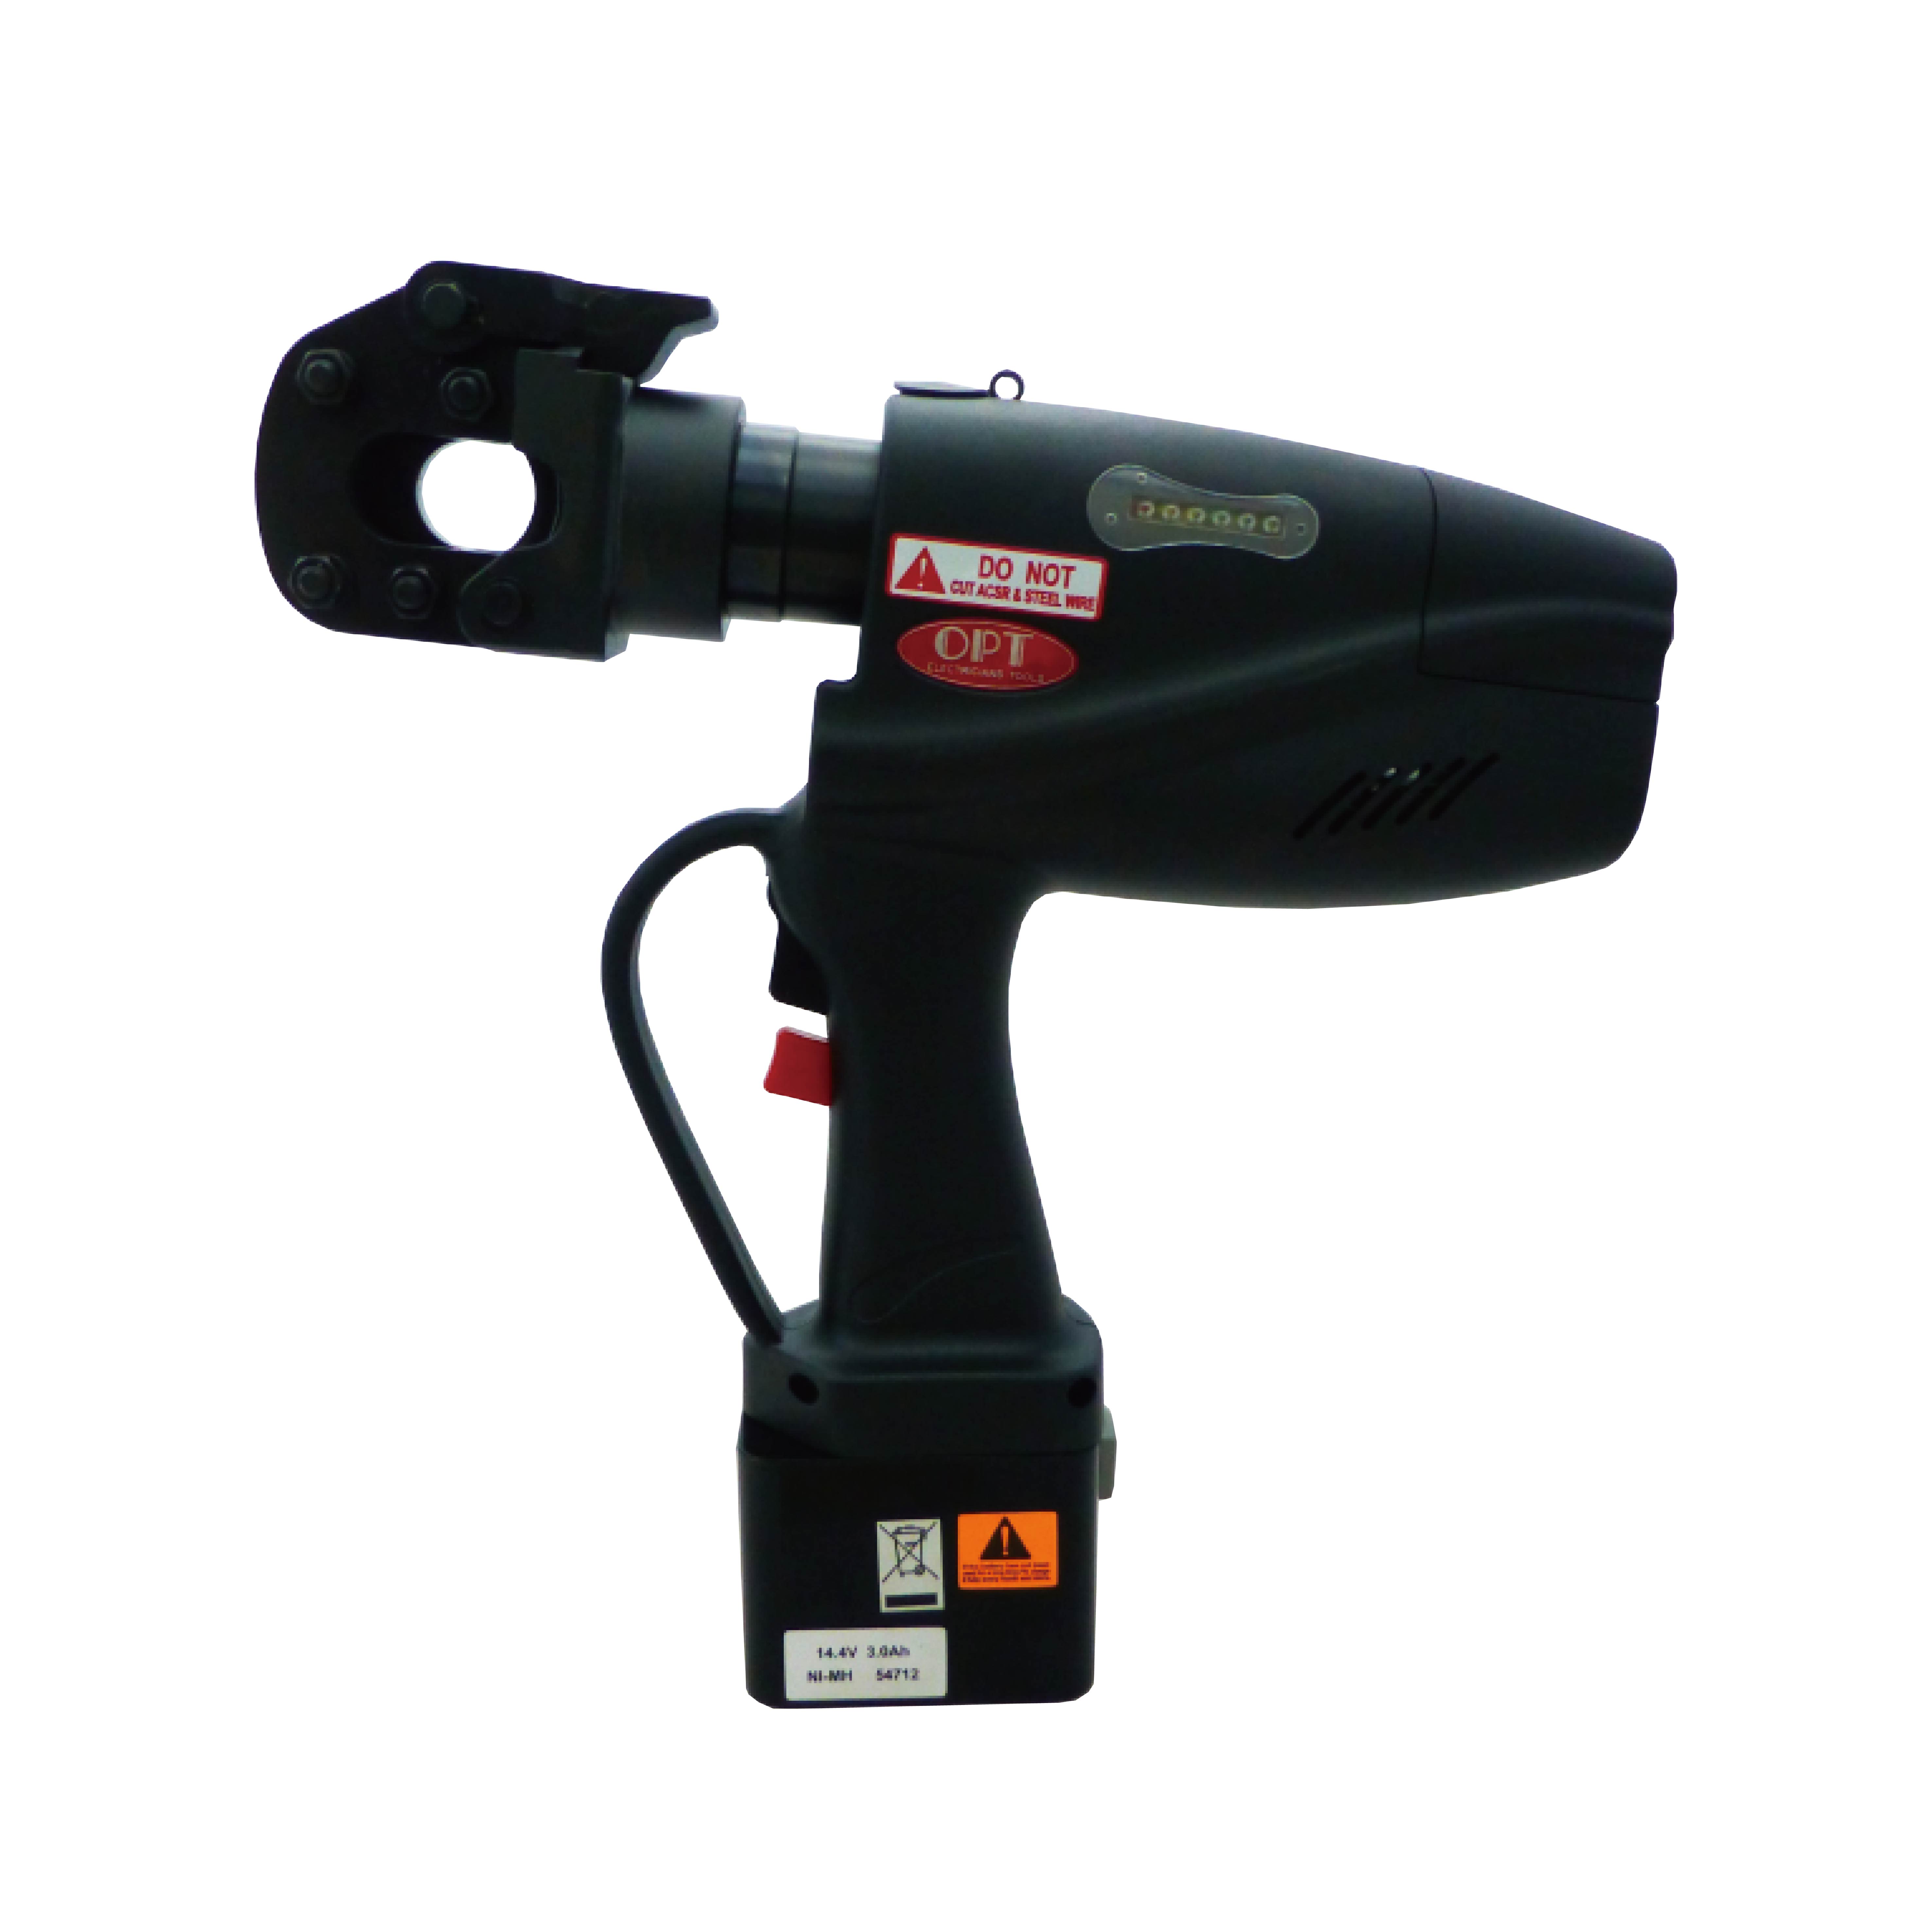 ECL-20 CORDLESS HYDRAULIC CABLE CUTTERS-ECL-20